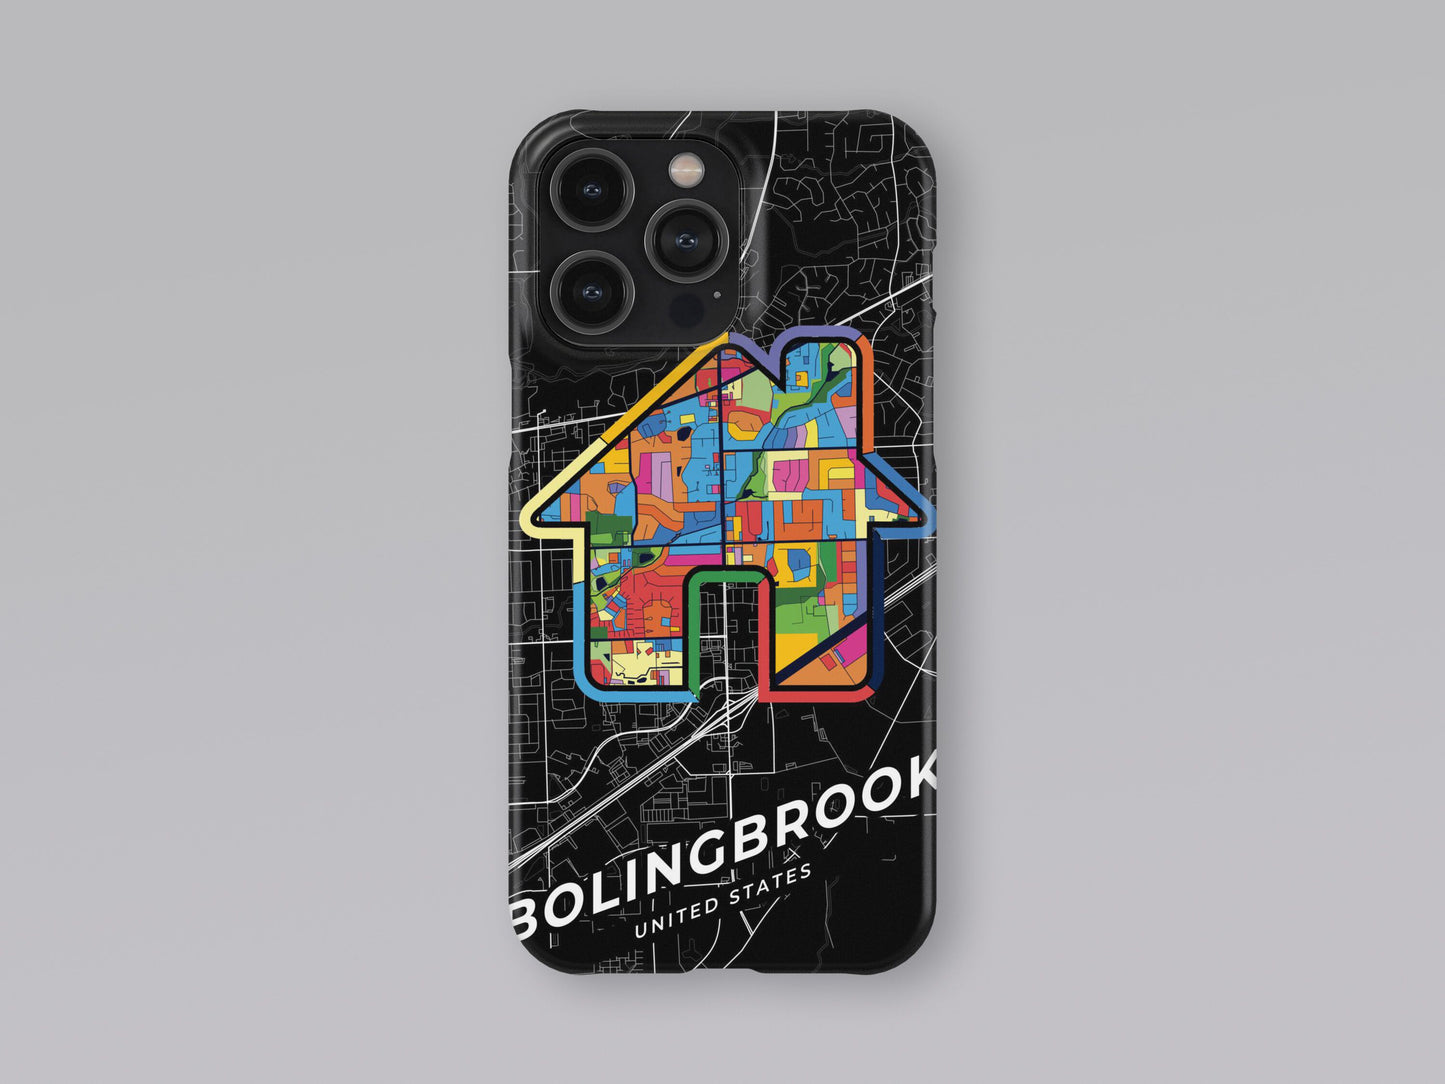 Bolingbrook Illinois slim phone case with colorful icon. Birthday, wedding or housewarming gift. Couple match cases. 3